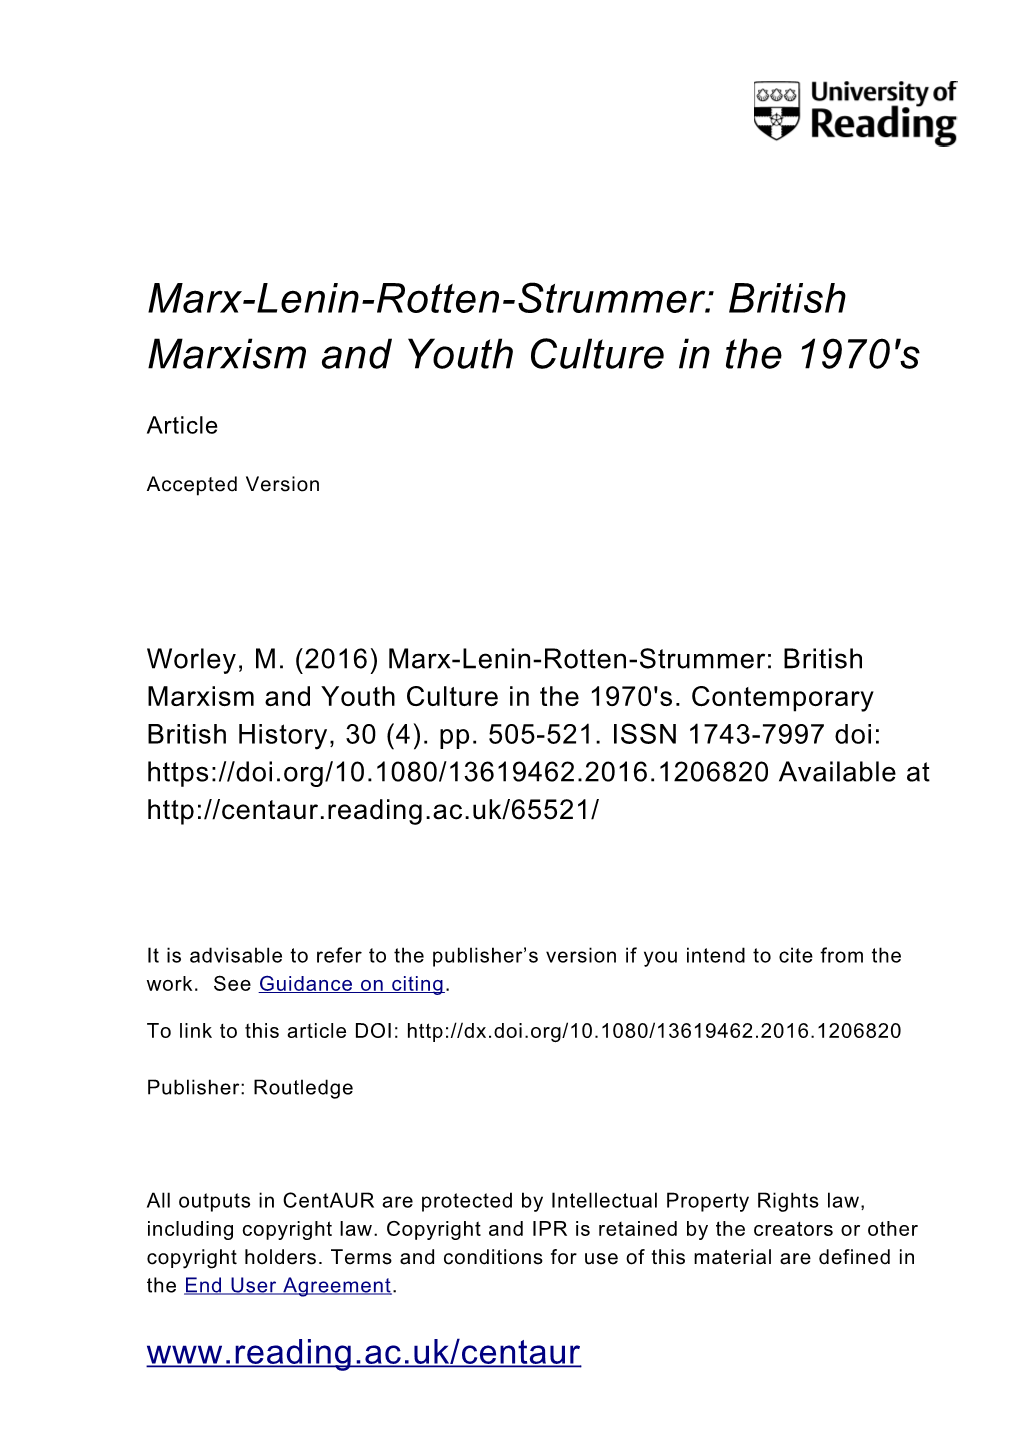 Marx-Lenin-Rotten-Strummer: British Marxism and Youth Culture in the 1970'S